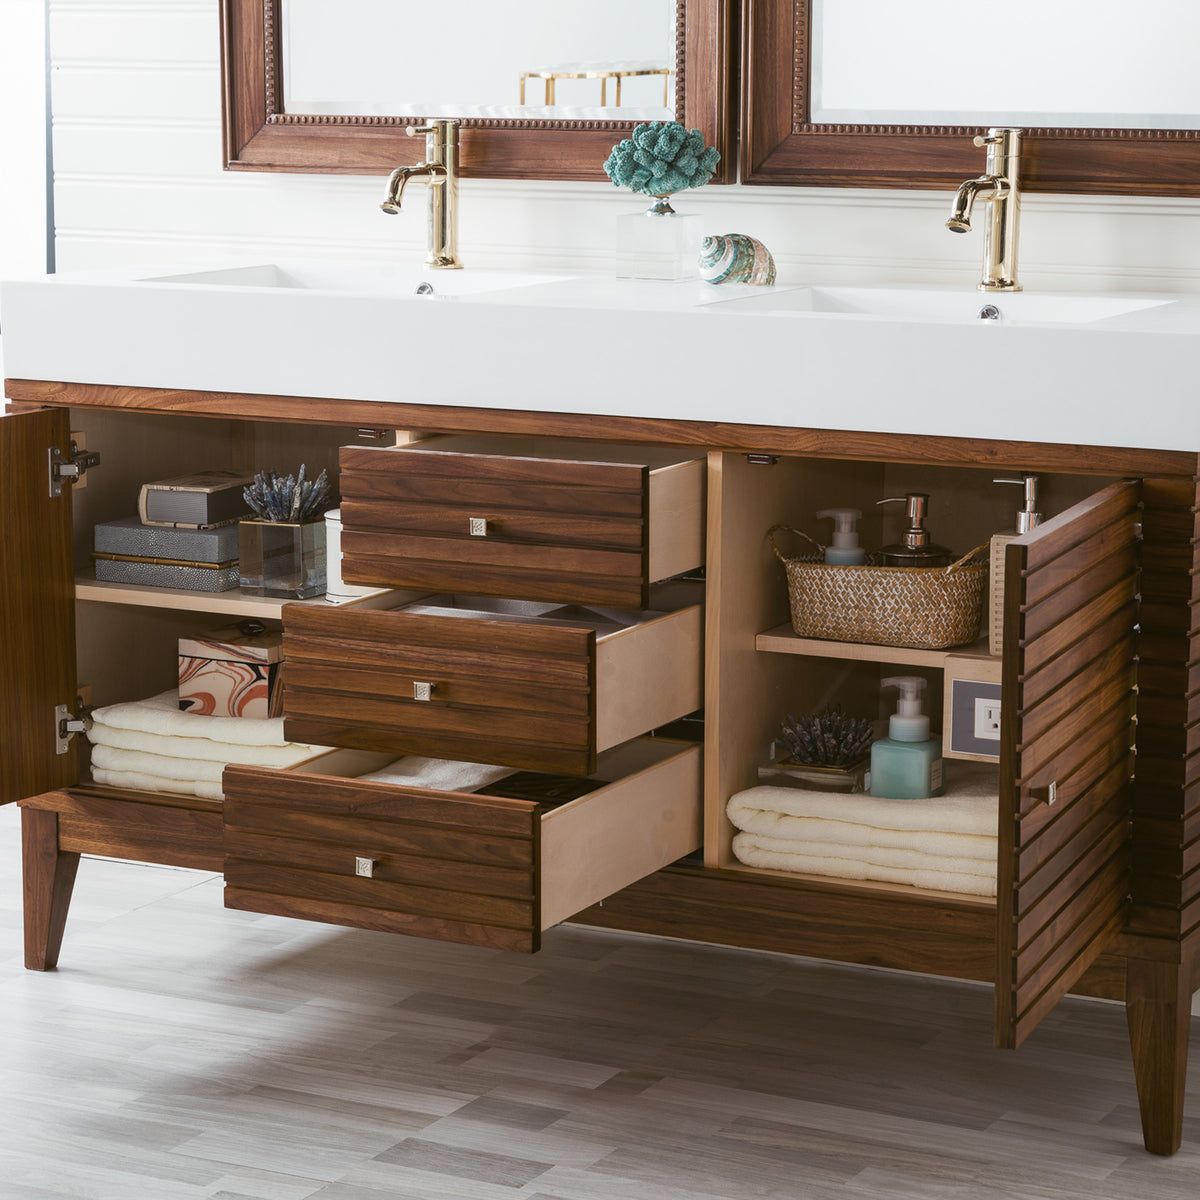 59" Linear Double Bathroom Vanity, Mid-Century Walnut with Glossy White Composite Top